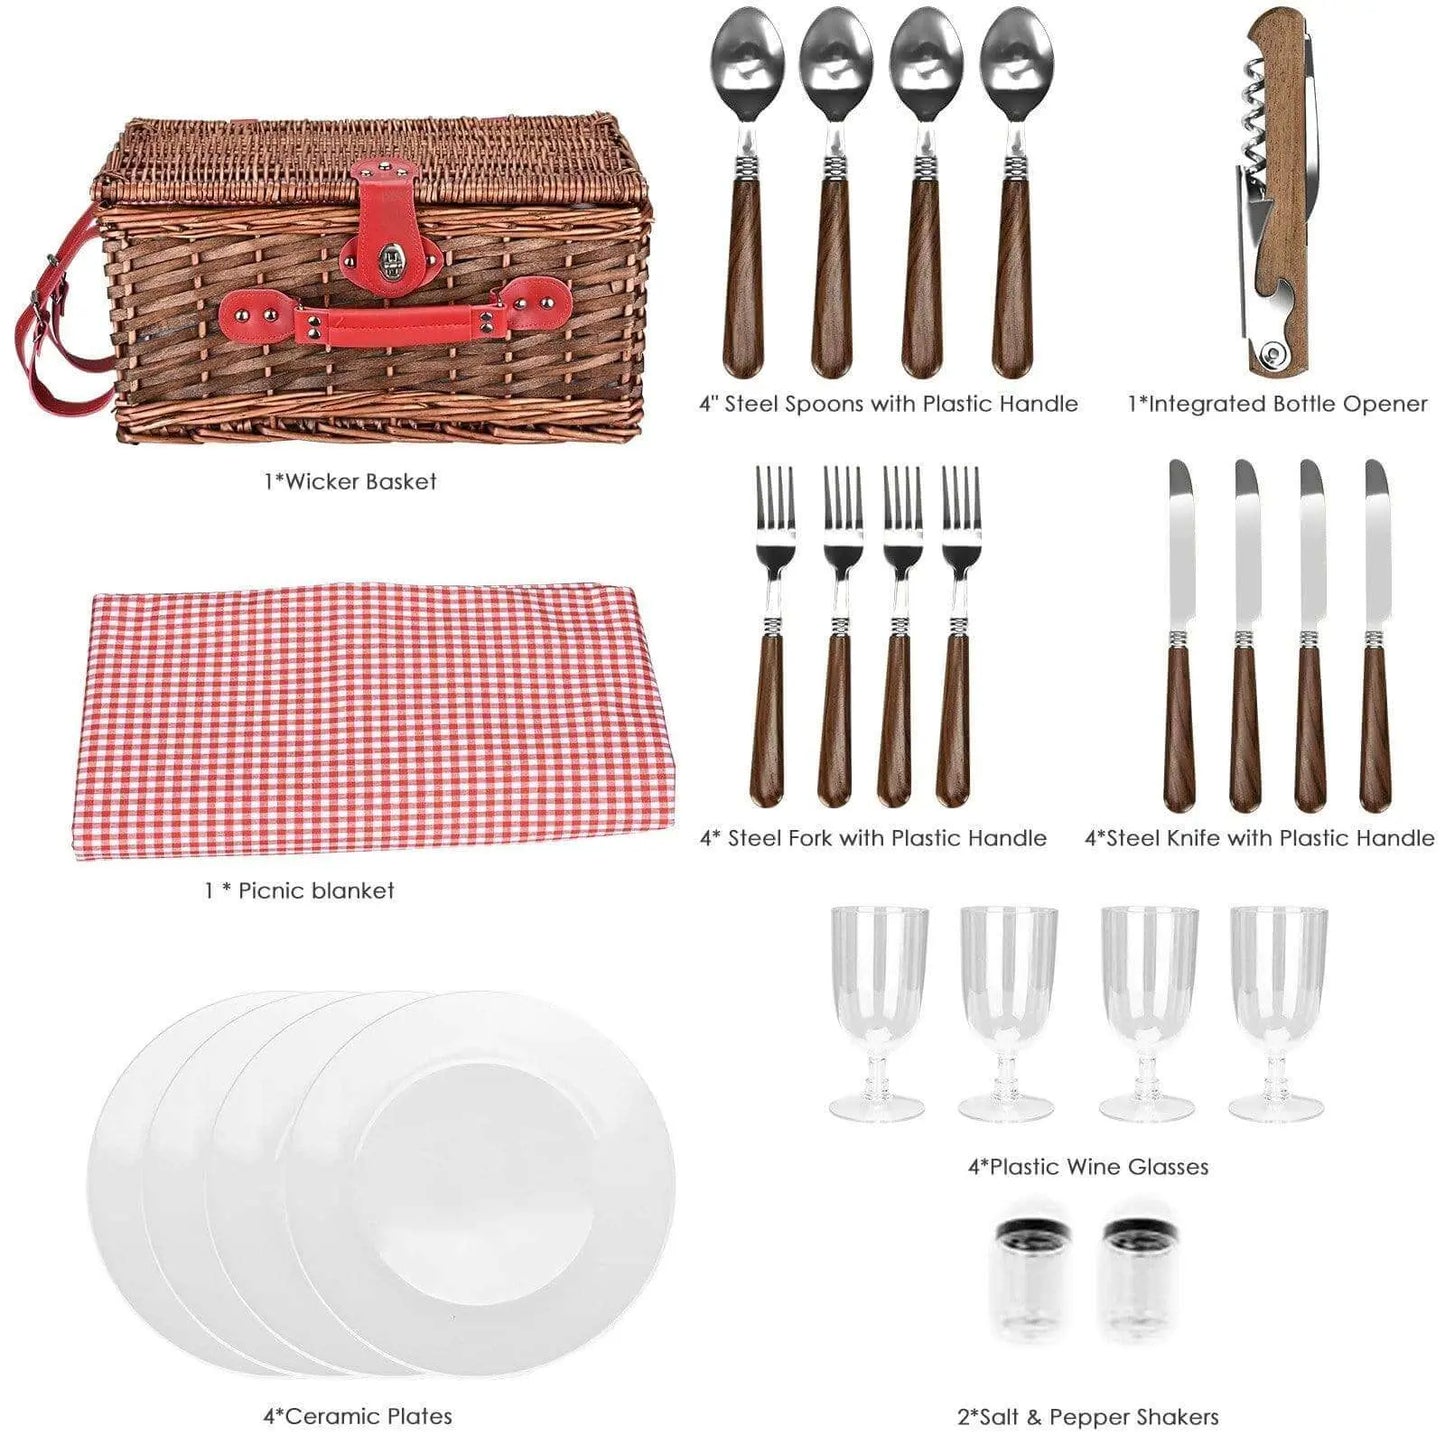 Exquisite set of plates, cutlery, and spice jars included in the Hedgehog Decor picnic basket.